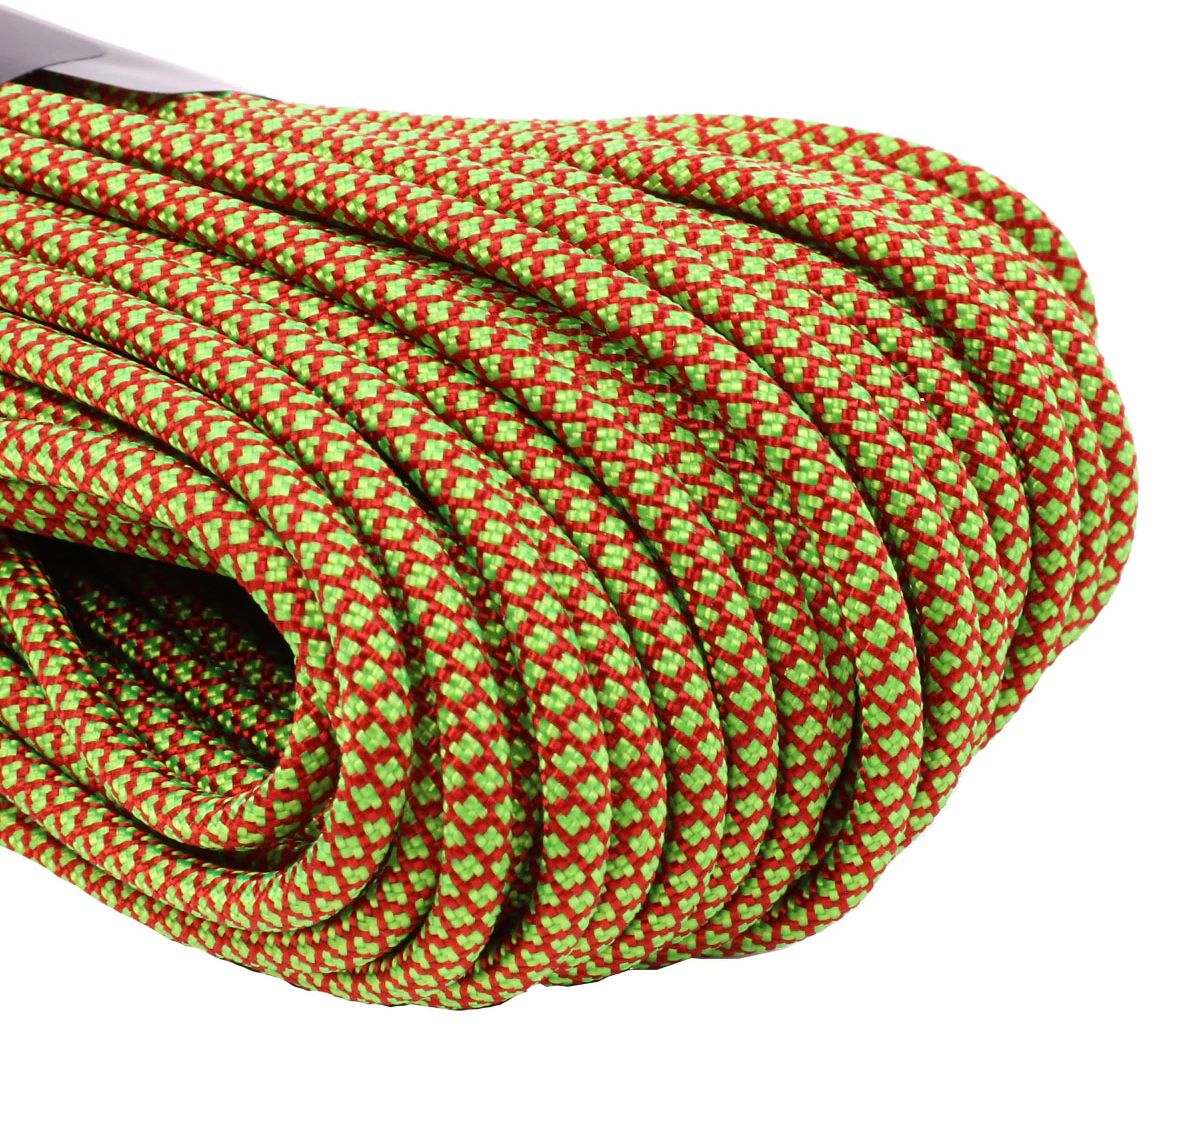 Atwood Rope 550 Paracord, Red/Sour Apple Diamonds, 100 Feet - KnifeCenter -  RG1316H